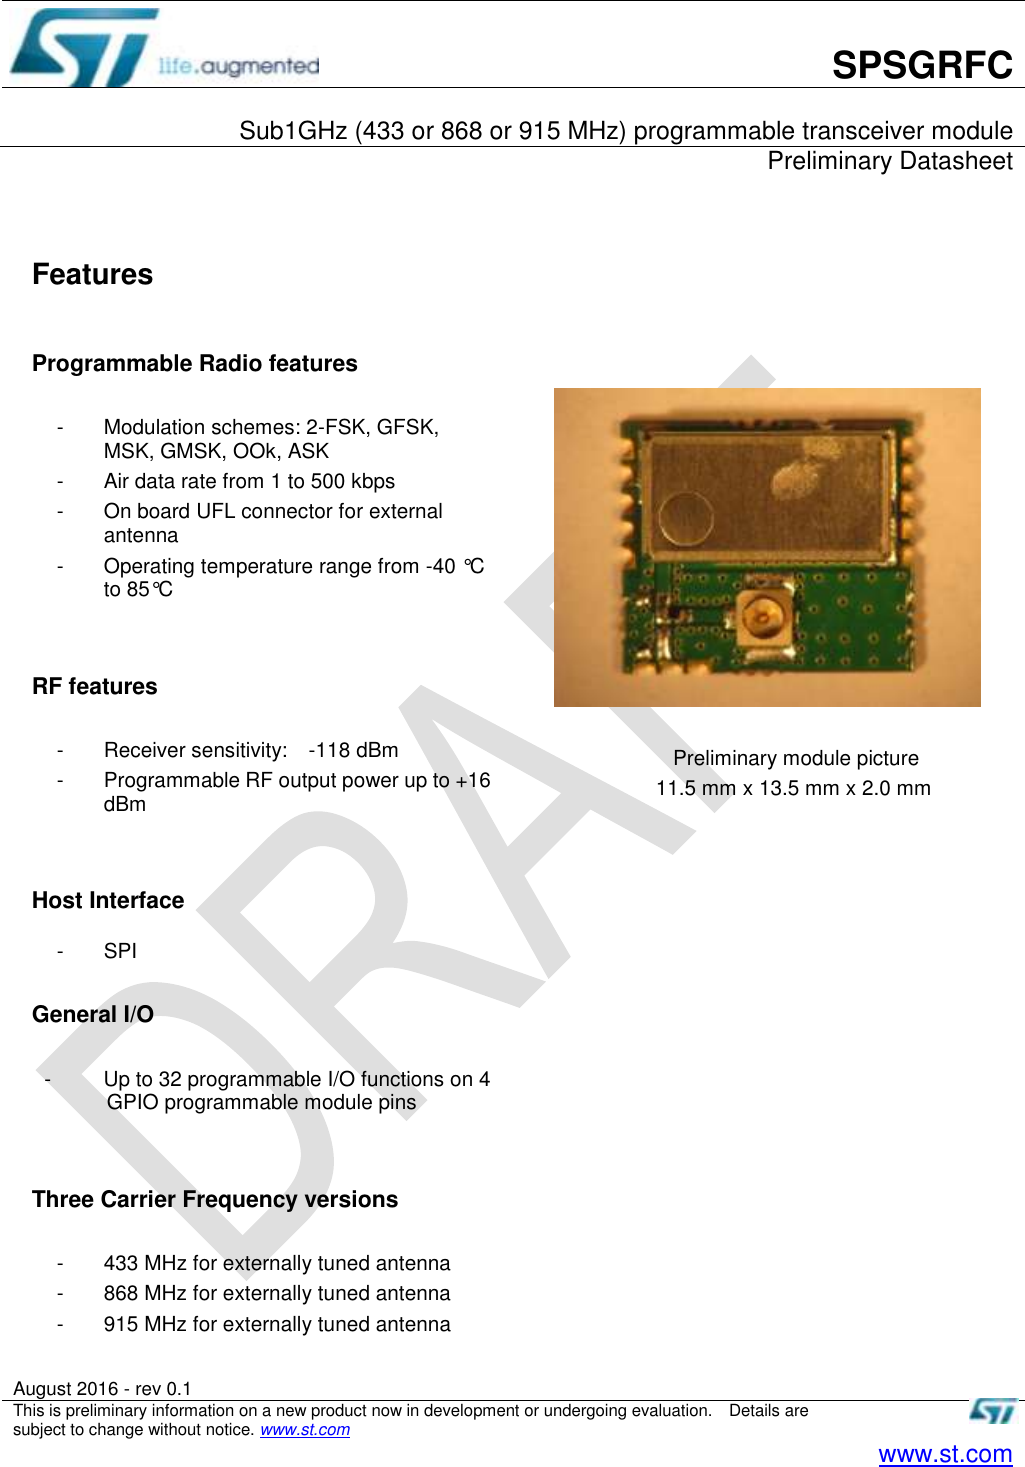       SPSGRFC  Sub1GHz (433 or 868 or 915 MHz) programmable transceiver module     Preliminary Datasheet   August 2016 - rev 0.1   This is preliminary information on a new product now in development or undergoing evaluation.    Details are subject to change without notice. www.st.com    www.st.com   Features  Programmable Radio features  -  Modulation schemes: 2-FSK, GFSK, MSK, GMSK, OOk, ASK -  Air data rate from 1 to 500 kbps -  On board UFL connector for external antenna   -  Operating temperature range from -40 °C to 85°C   RF features    -  Receiver sensitivity:    -118 dBm -  Programmable RF output power up to +16 dBm   Host Interface  -  SPI  General I/O  -          Up to 32 programmable I/O functions on 4 GPIO programmable module pins     Three Carrier Frequency versions    -  433 MHz for externally tuned antenna -  868 MHz for externally tuned antenna -  915 MHz for externally tuned antenna           Preliminary module picture 11.5 mm x 13.5 mm x 2.0 mm  